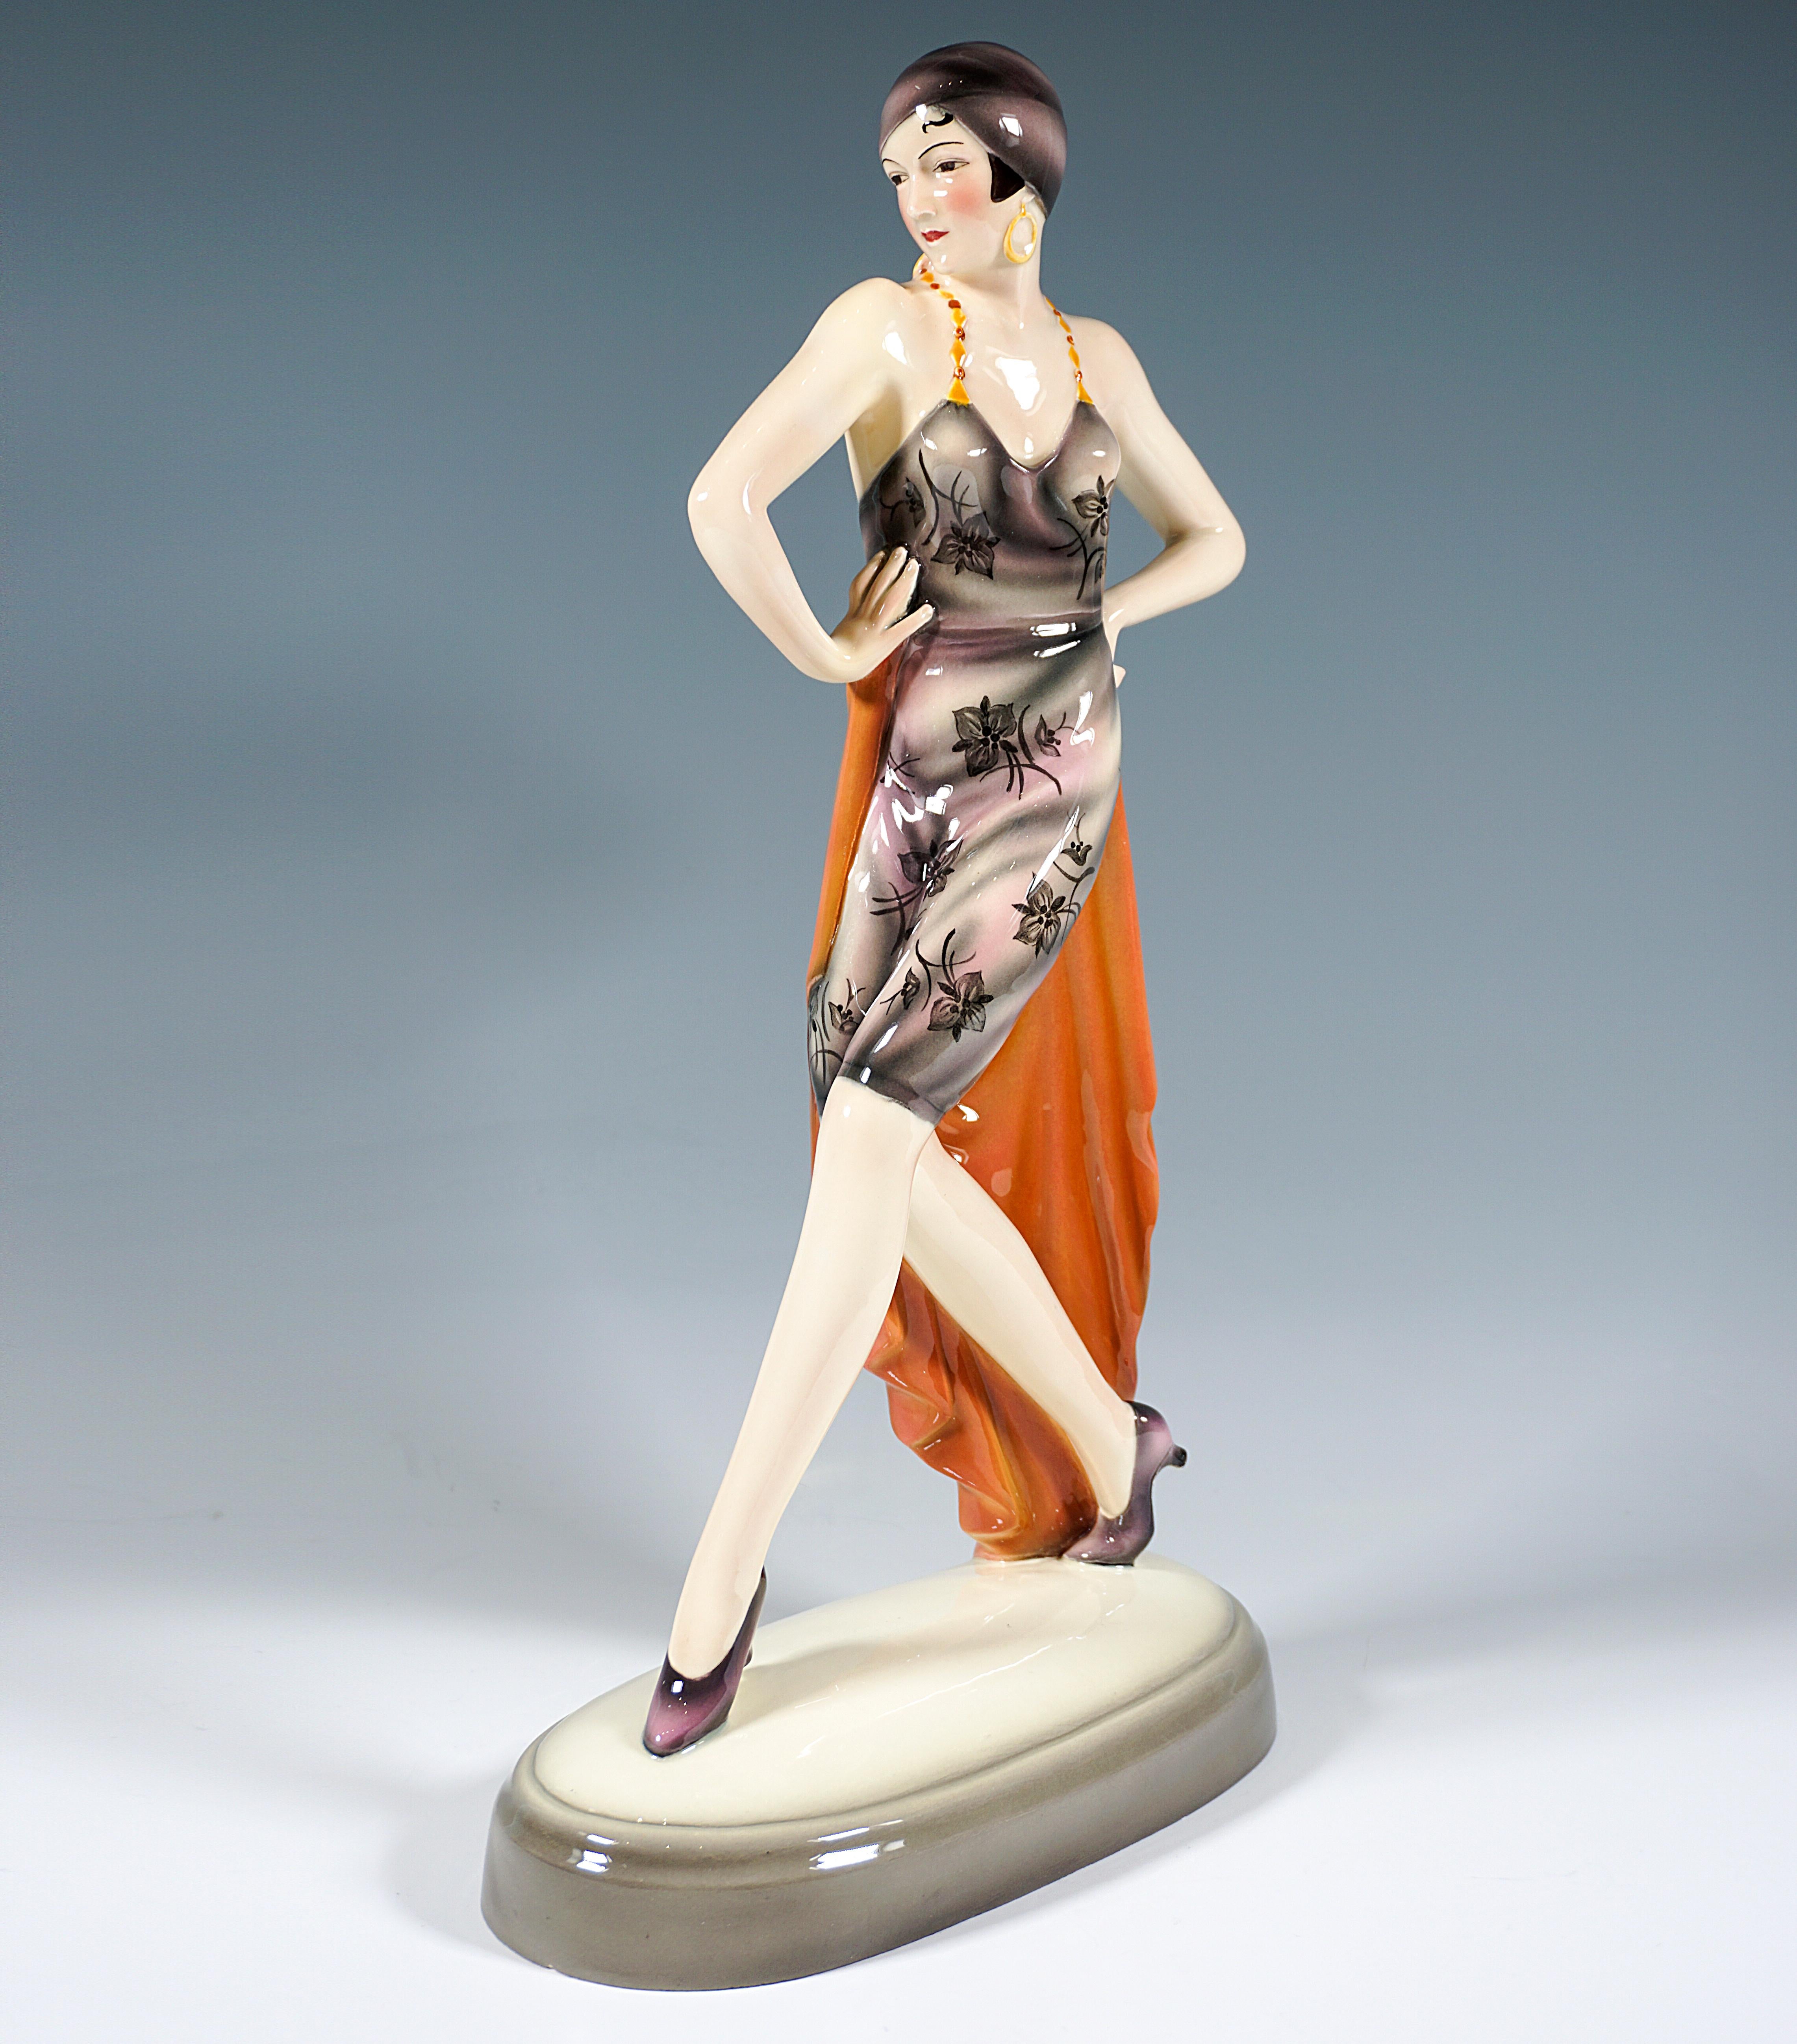 Extremeley rare porcelain figurine around 1930:
Elegant dancer striding to the side with her upper body turned forward, wearing a knee-length, shimmering gray-pink trouser dress with floral decoration, yellow-red pearl strap and low-cut back, and a